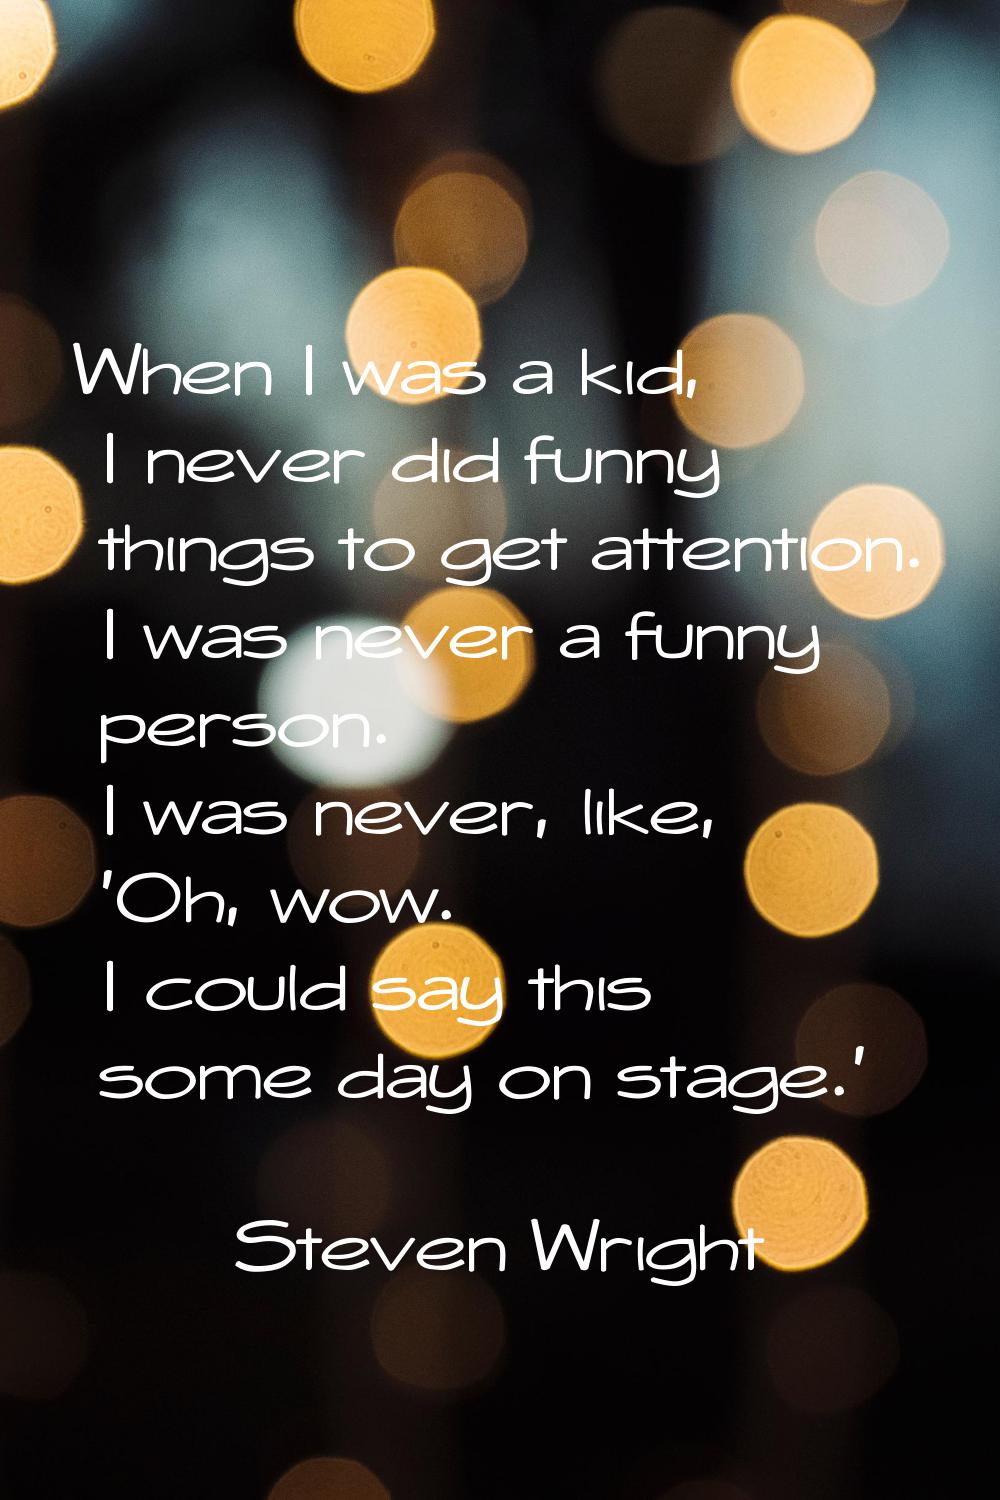 When I was a kid, I never did funny things to get attention. I was never a funny person. I was neve